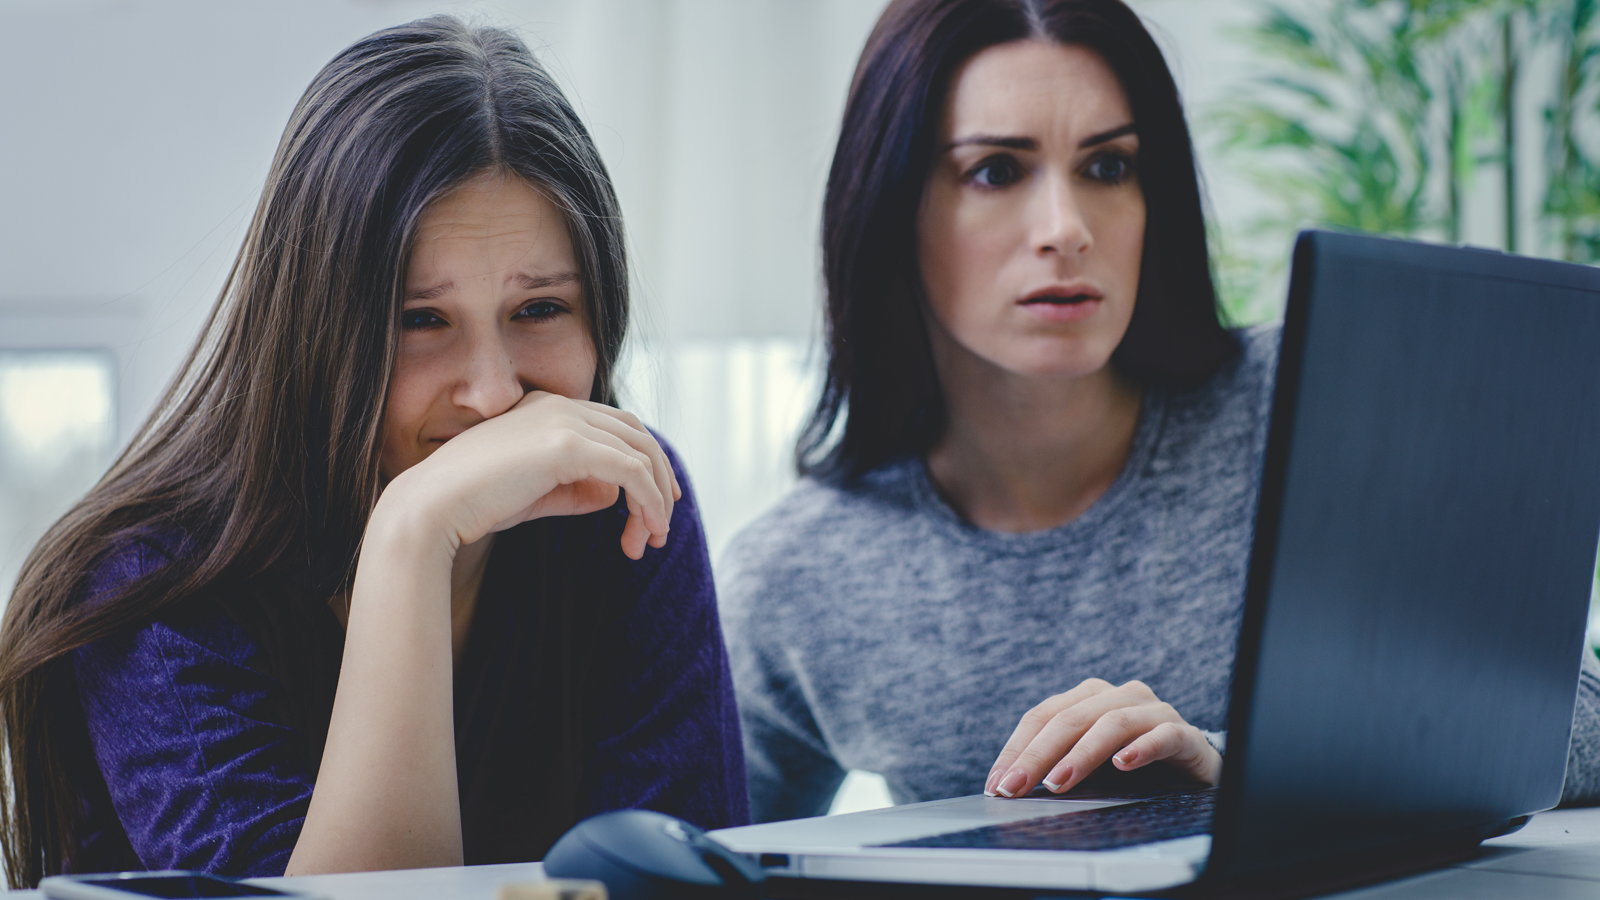 mother and daughter upset looking at laptop